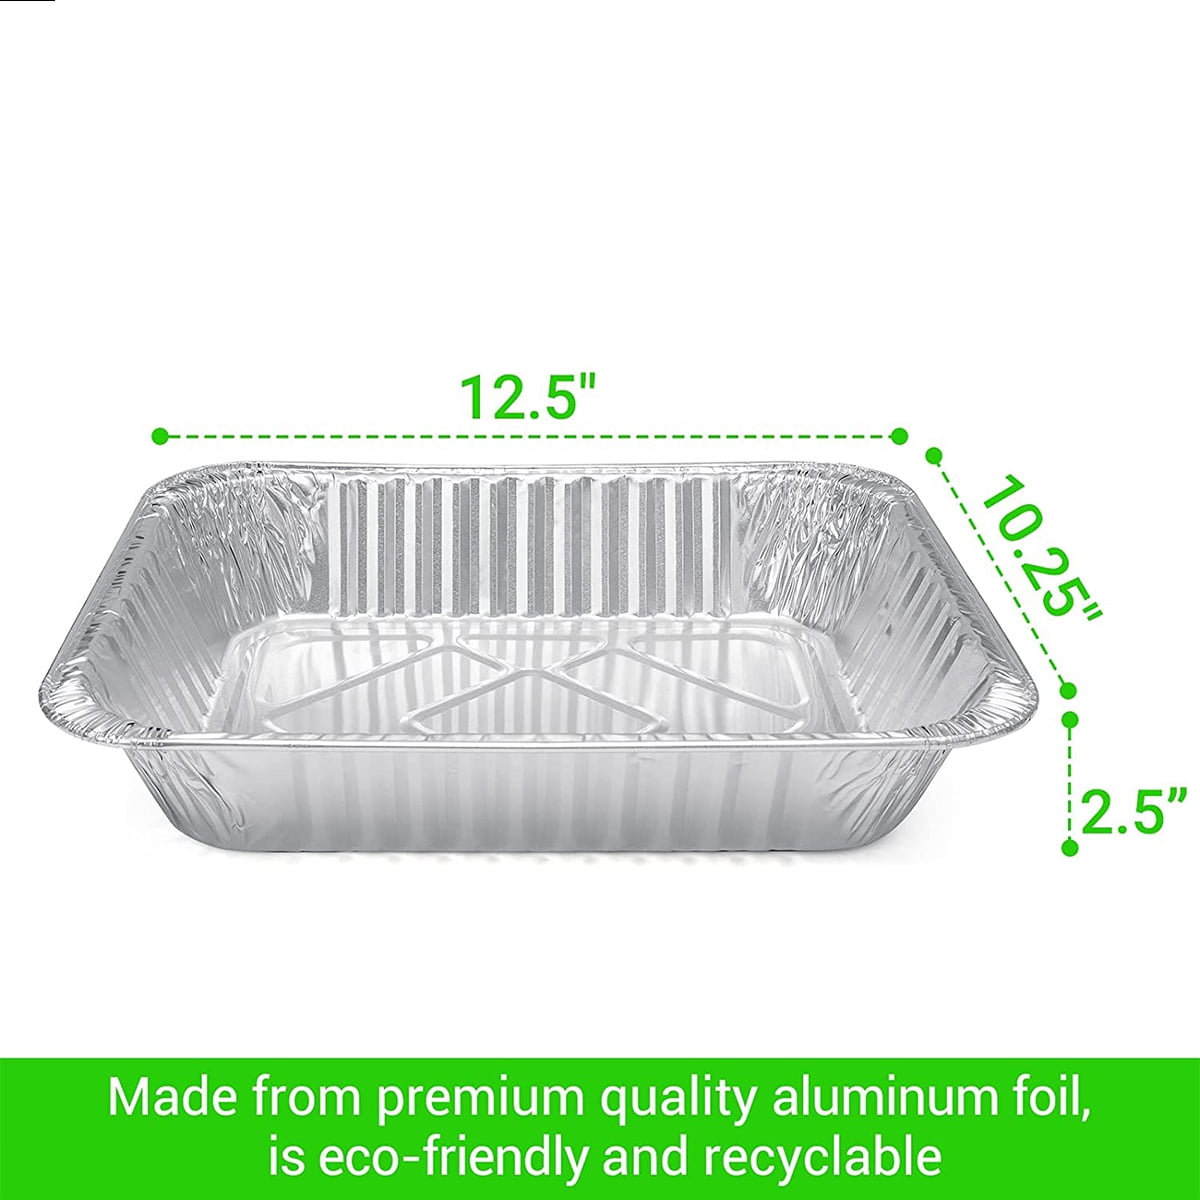 Tiger Chef Aluminum Foil Pans Disposable - 9x13 Baking Pan - Half Size Steam Table Pans - Pack of 30 6G9382W